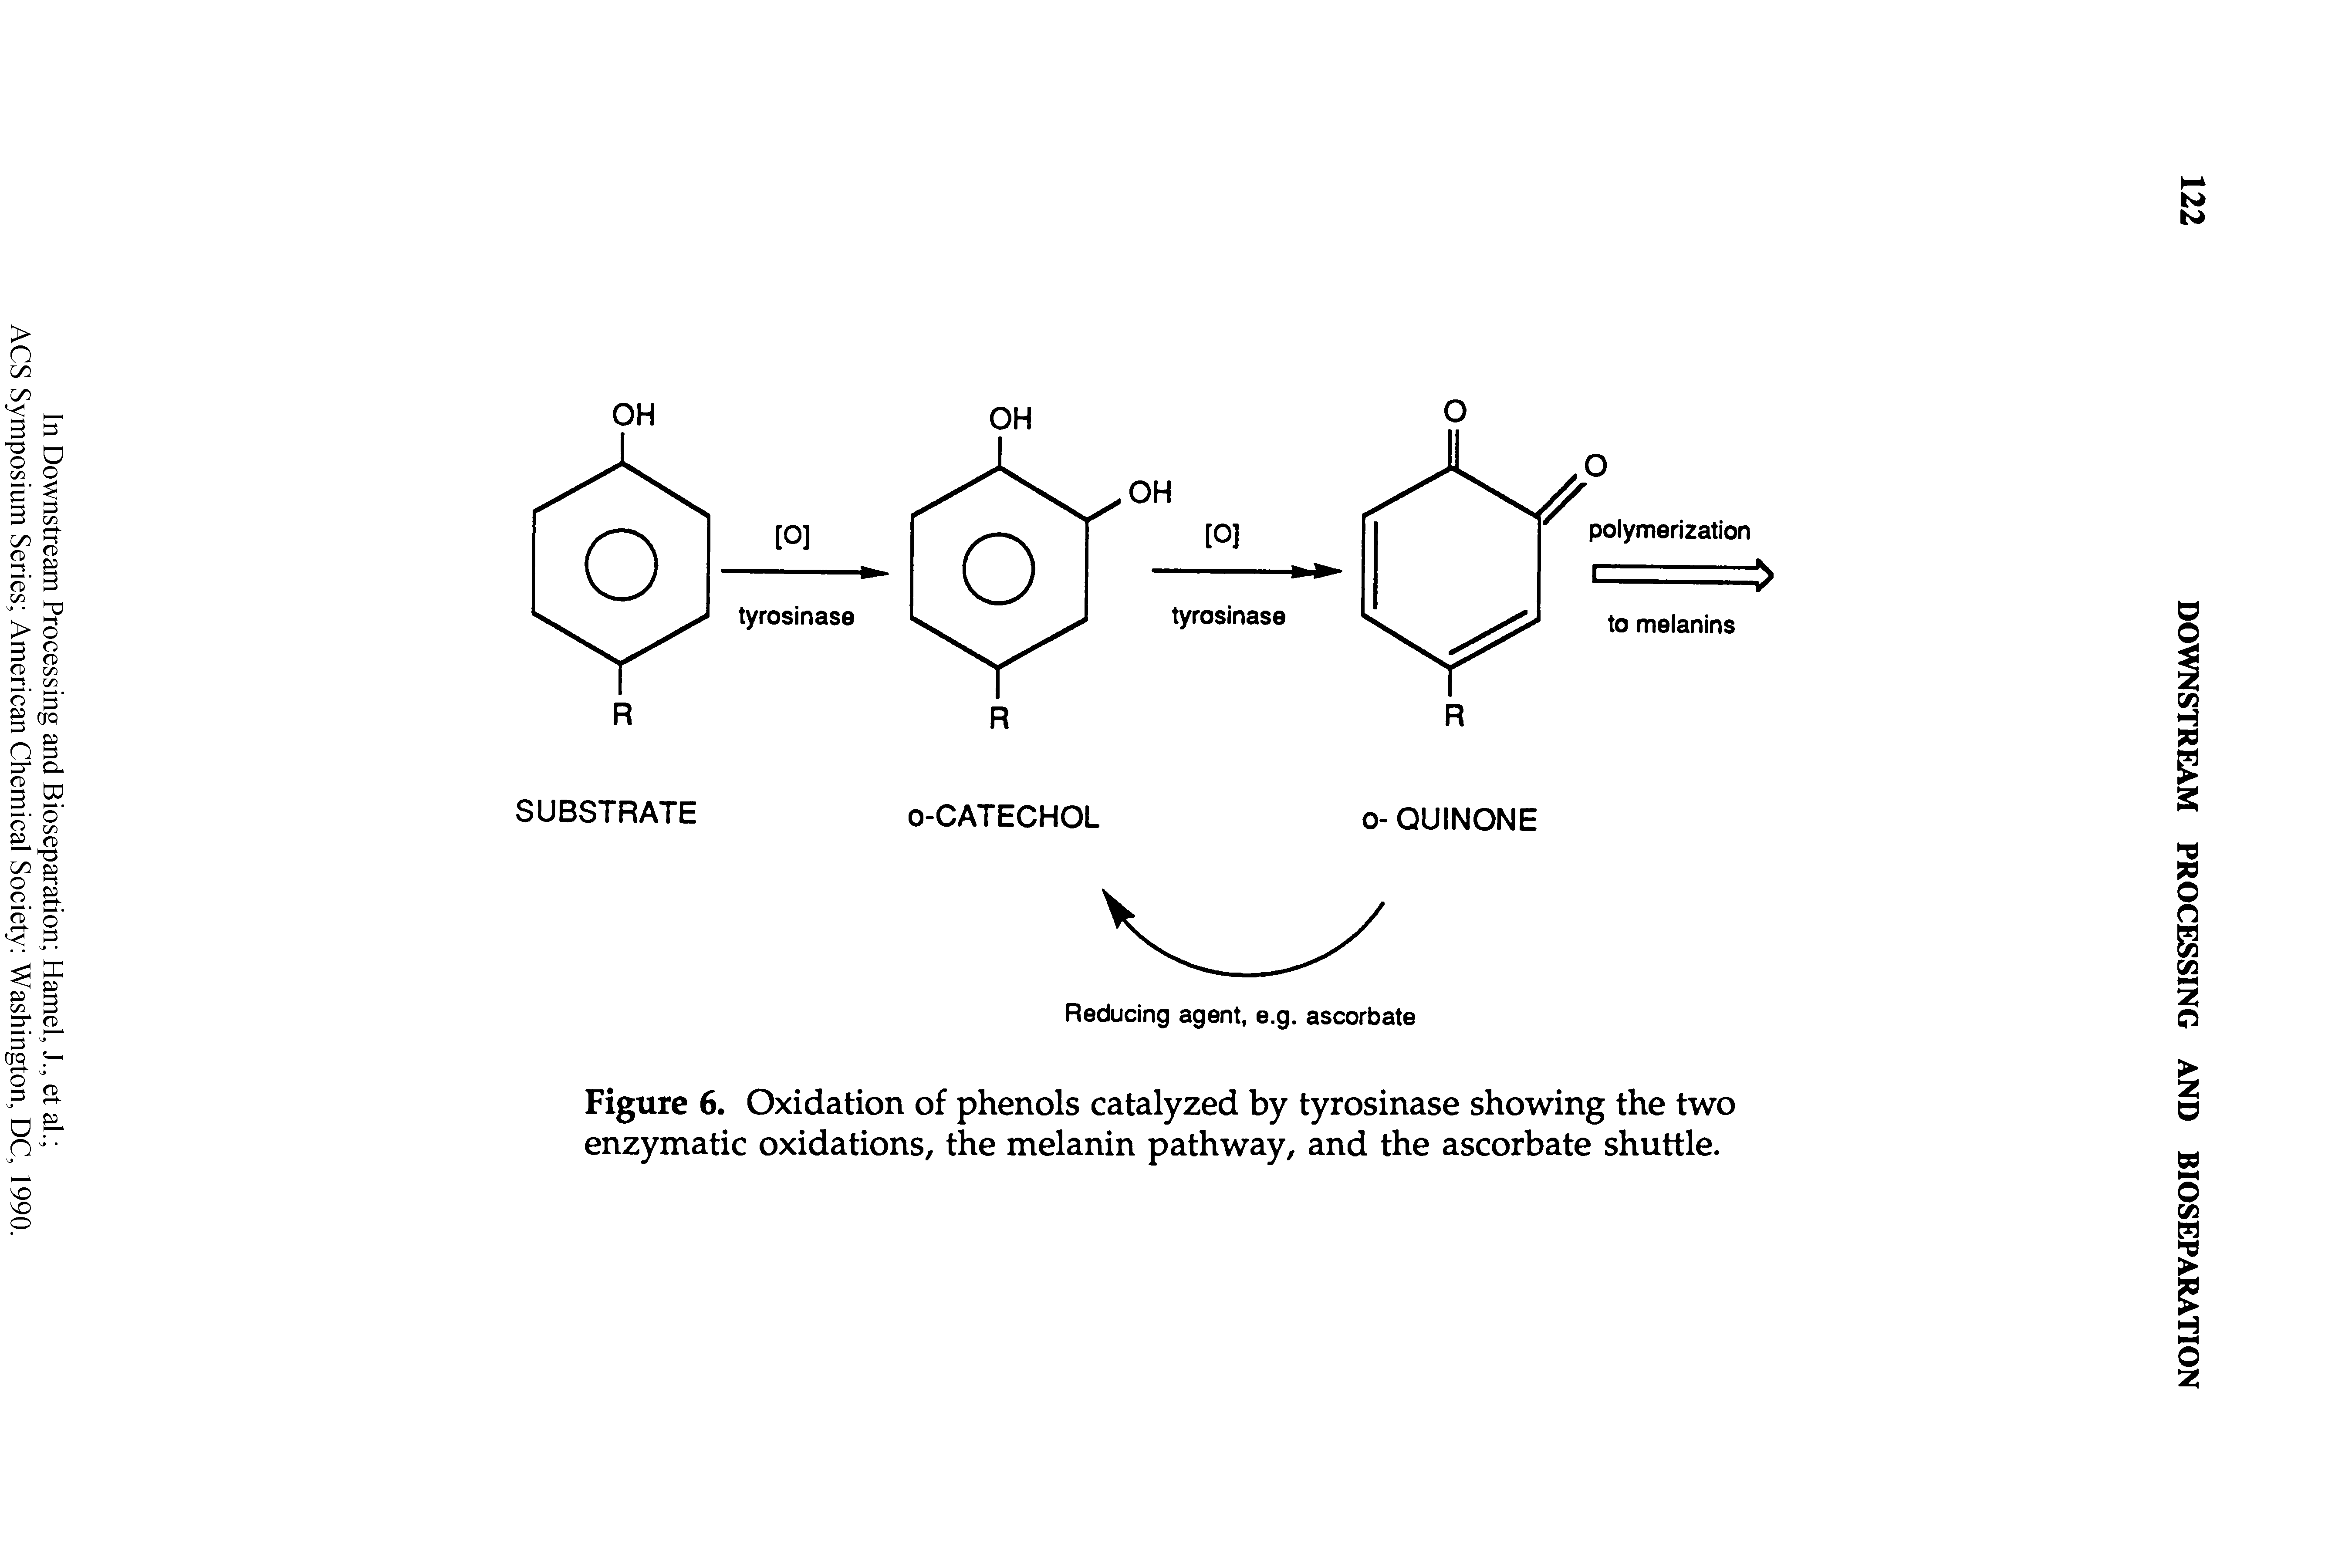 Figure 6. Oxidation of phenols catalyzed by tyrosinase showing the two enzymatic oxidations, the melanin pathway, and the ascorbate shuttle.